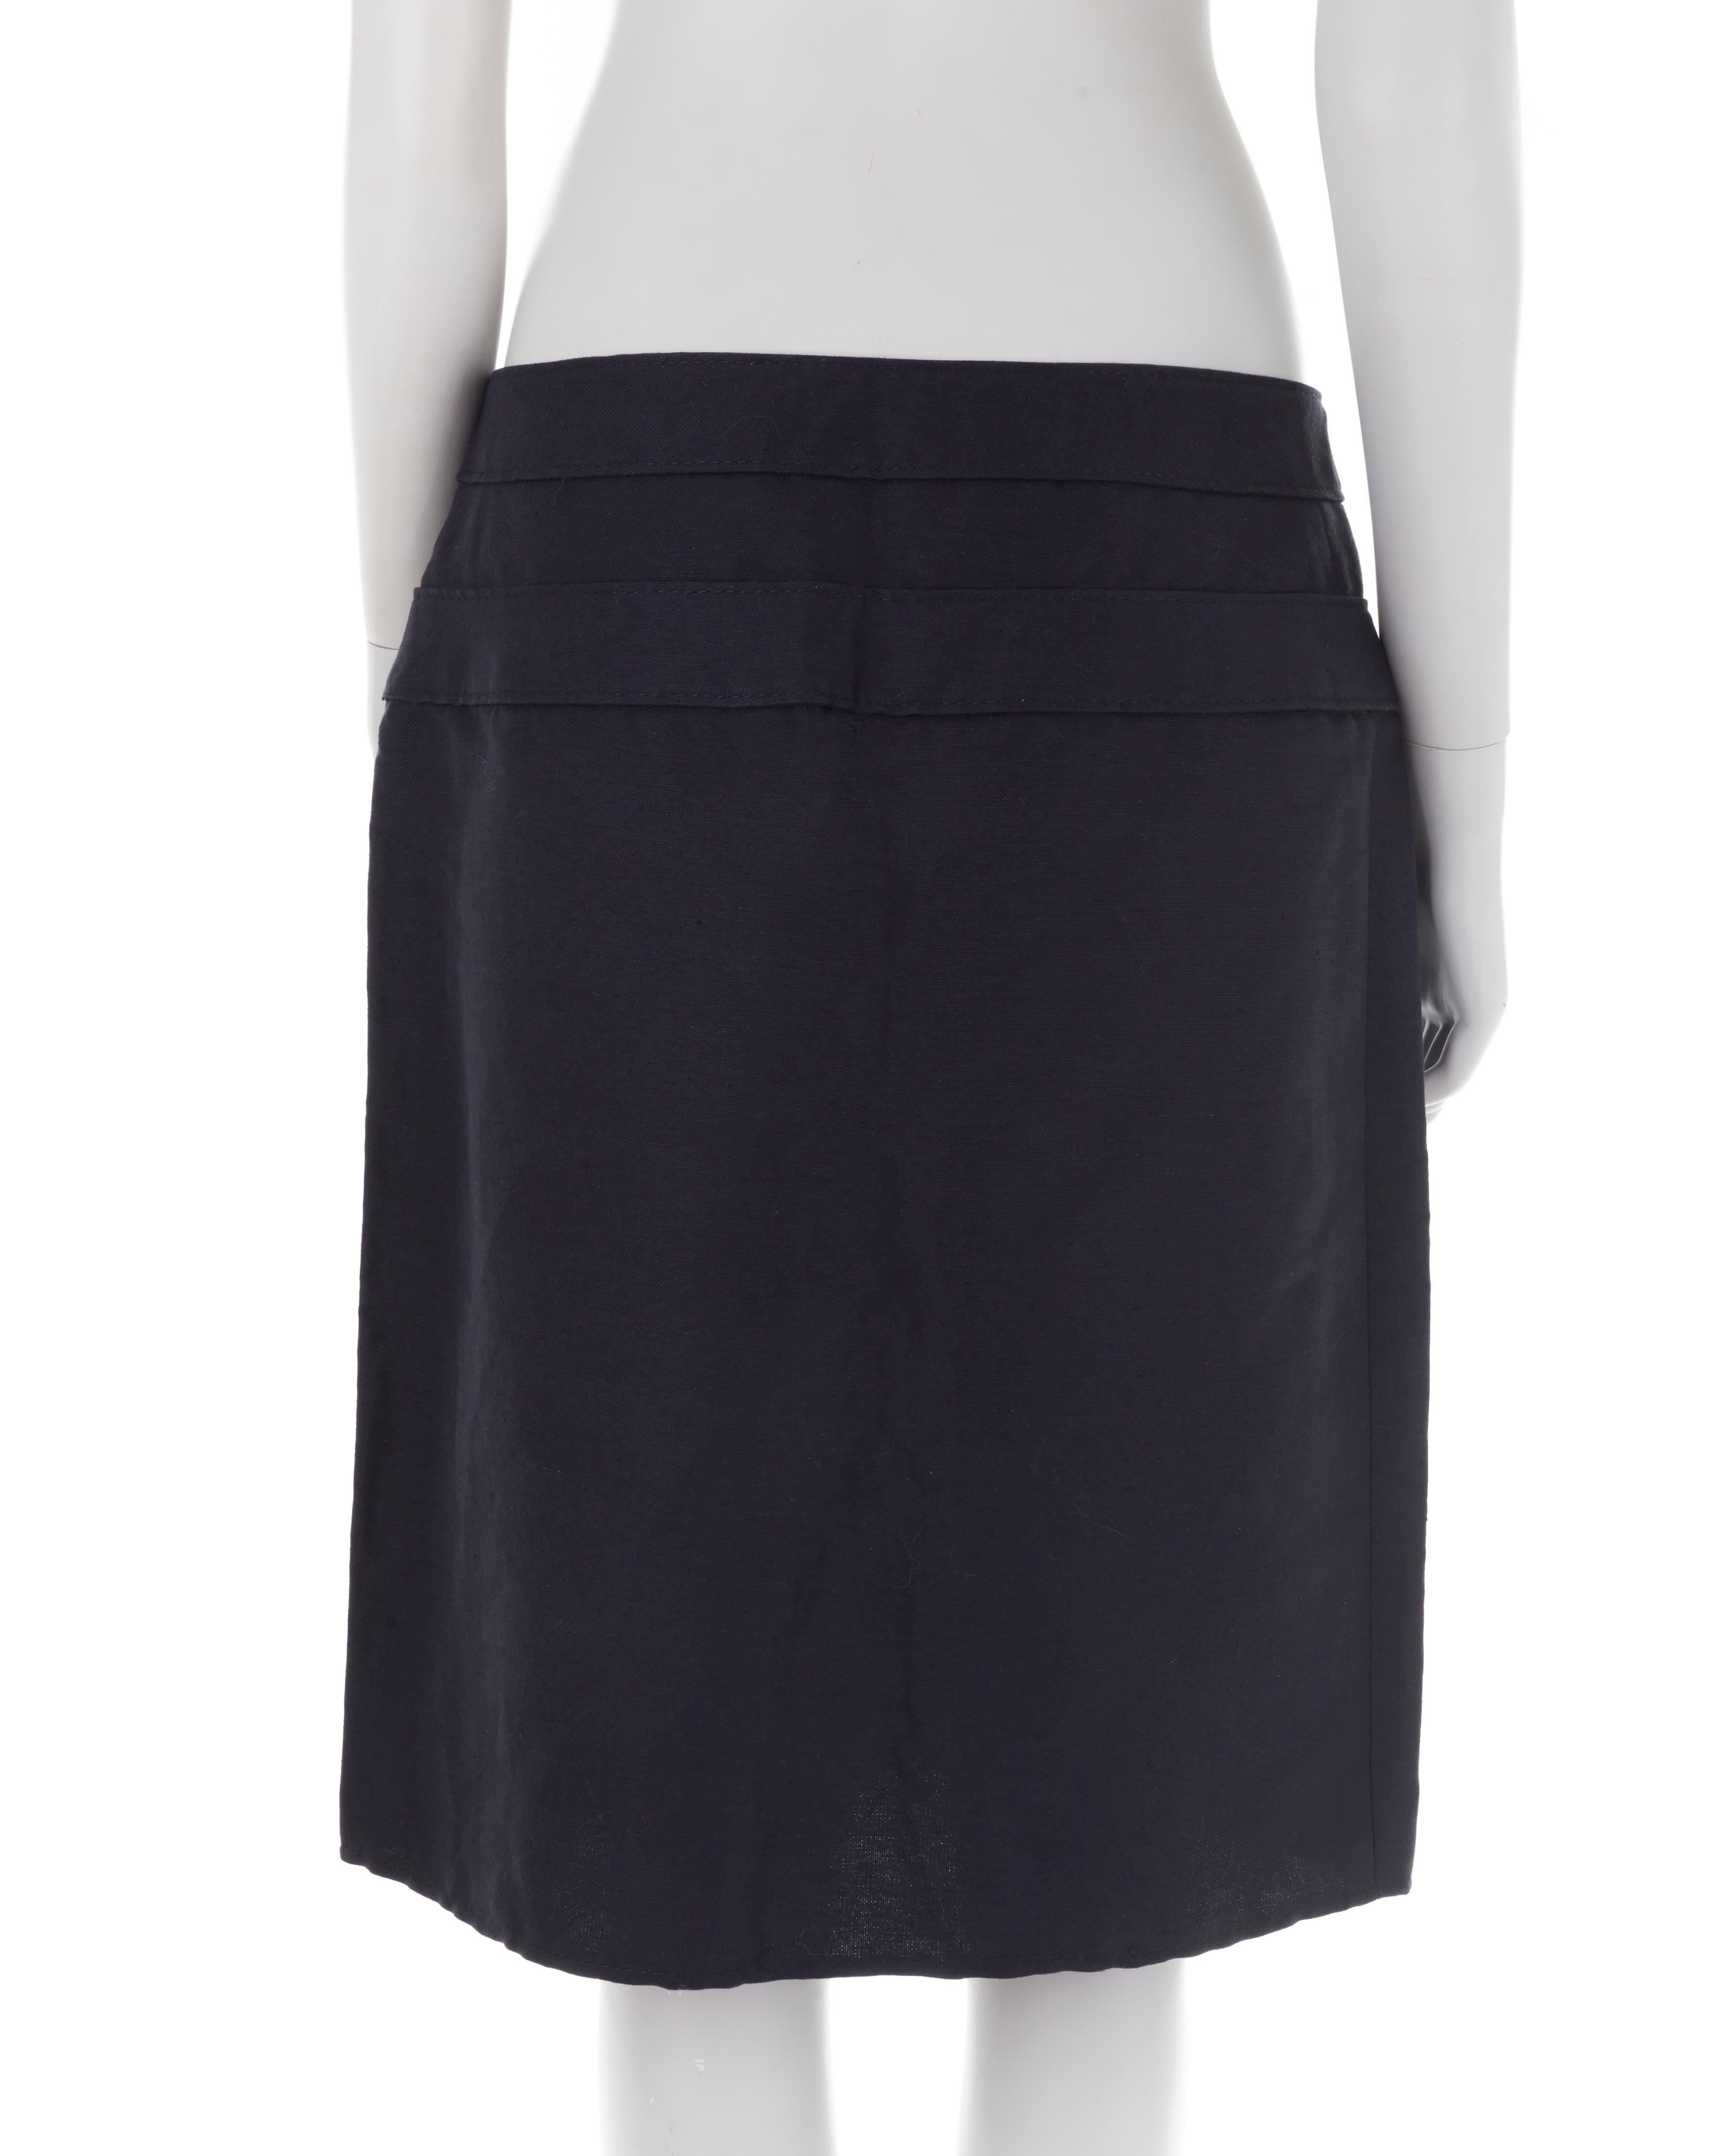 Valentino S/S 2004 navy blue double belt skirt In Good Condition For Sale In Rome, IT